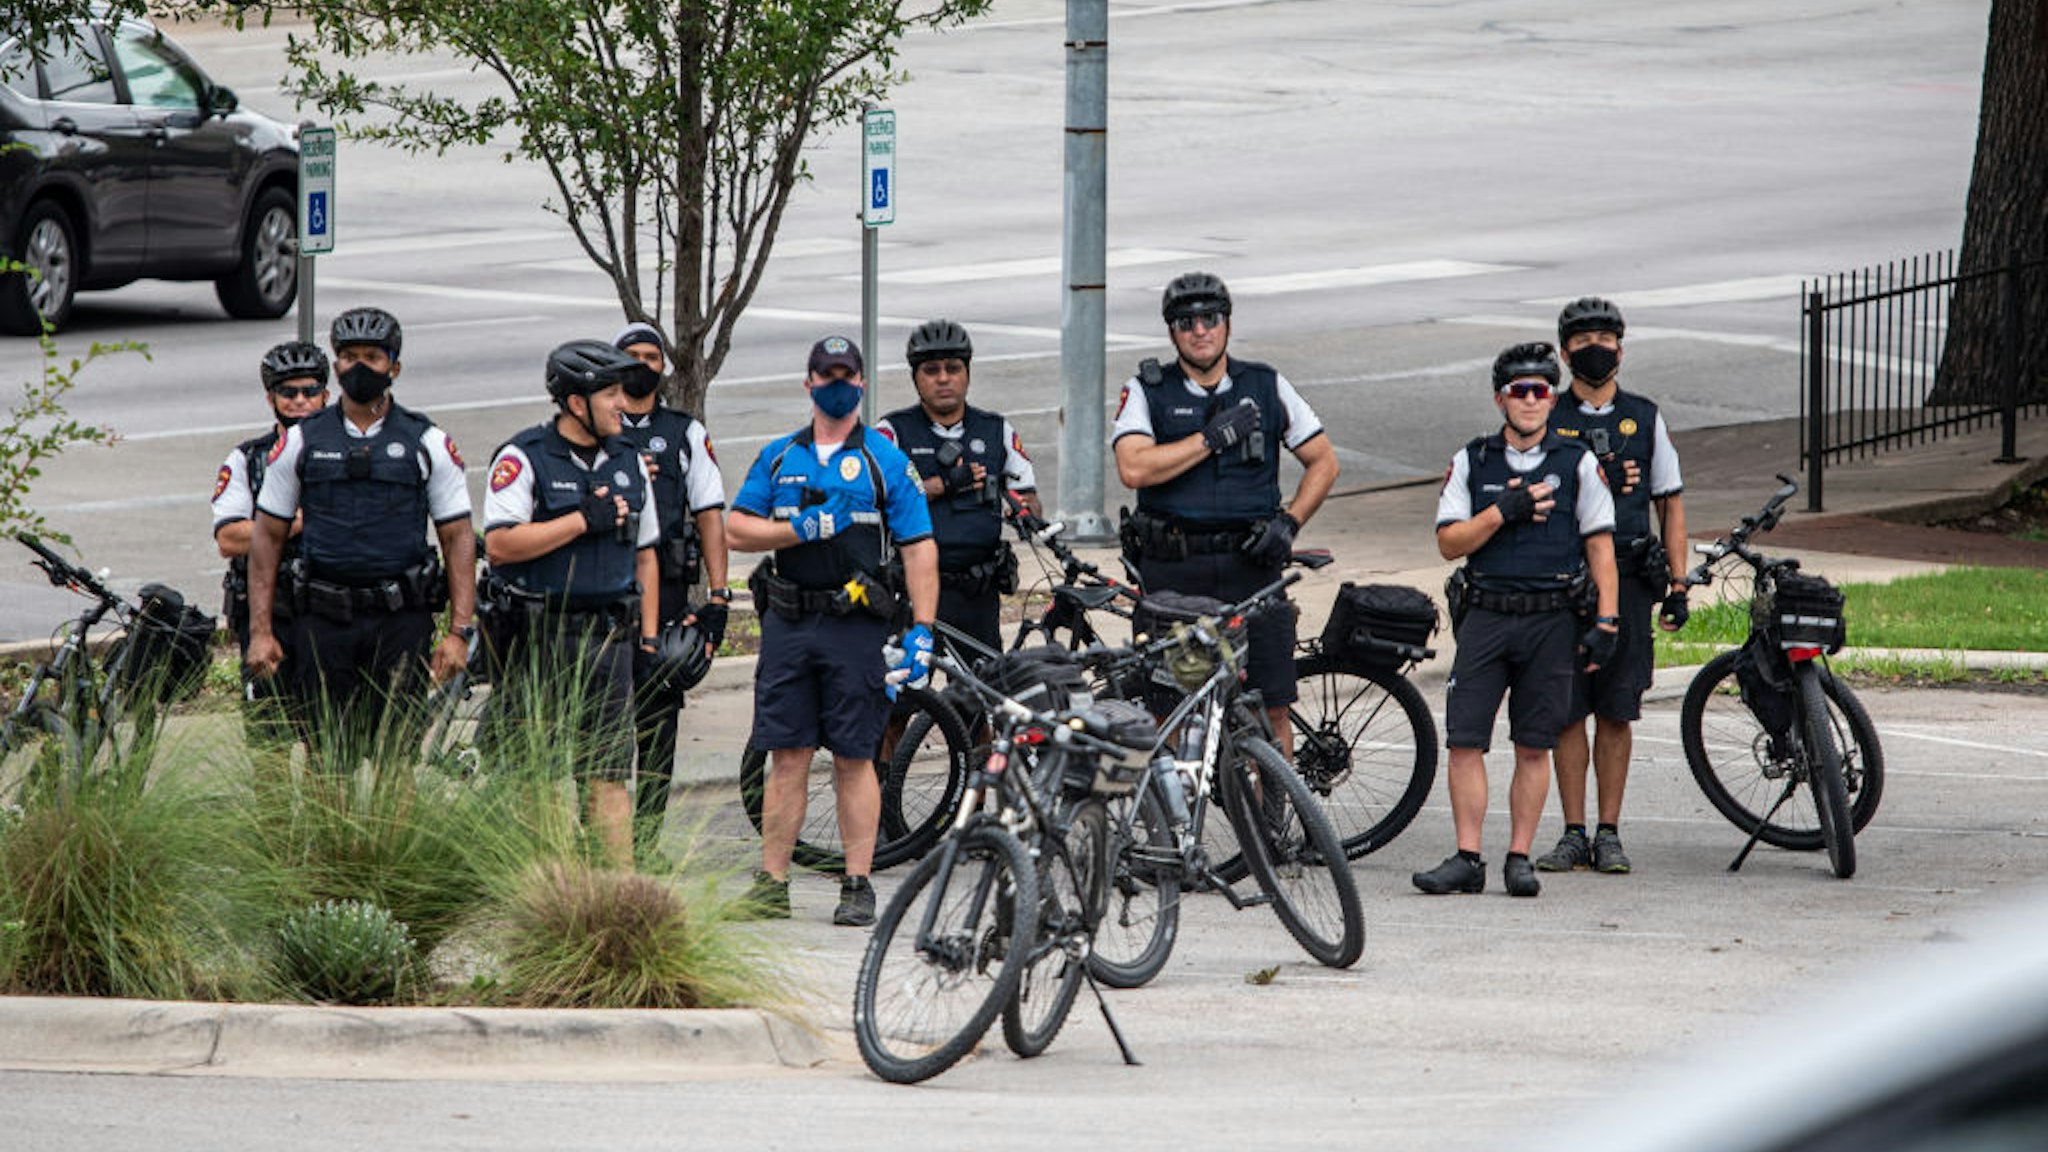 Police officers hold their hands over their hearts as a demonstrator sings the National Anthem during a "Bar Lives Matter" protest in Austin, Texas, U.S., on Tuesday, June 30, 2020.